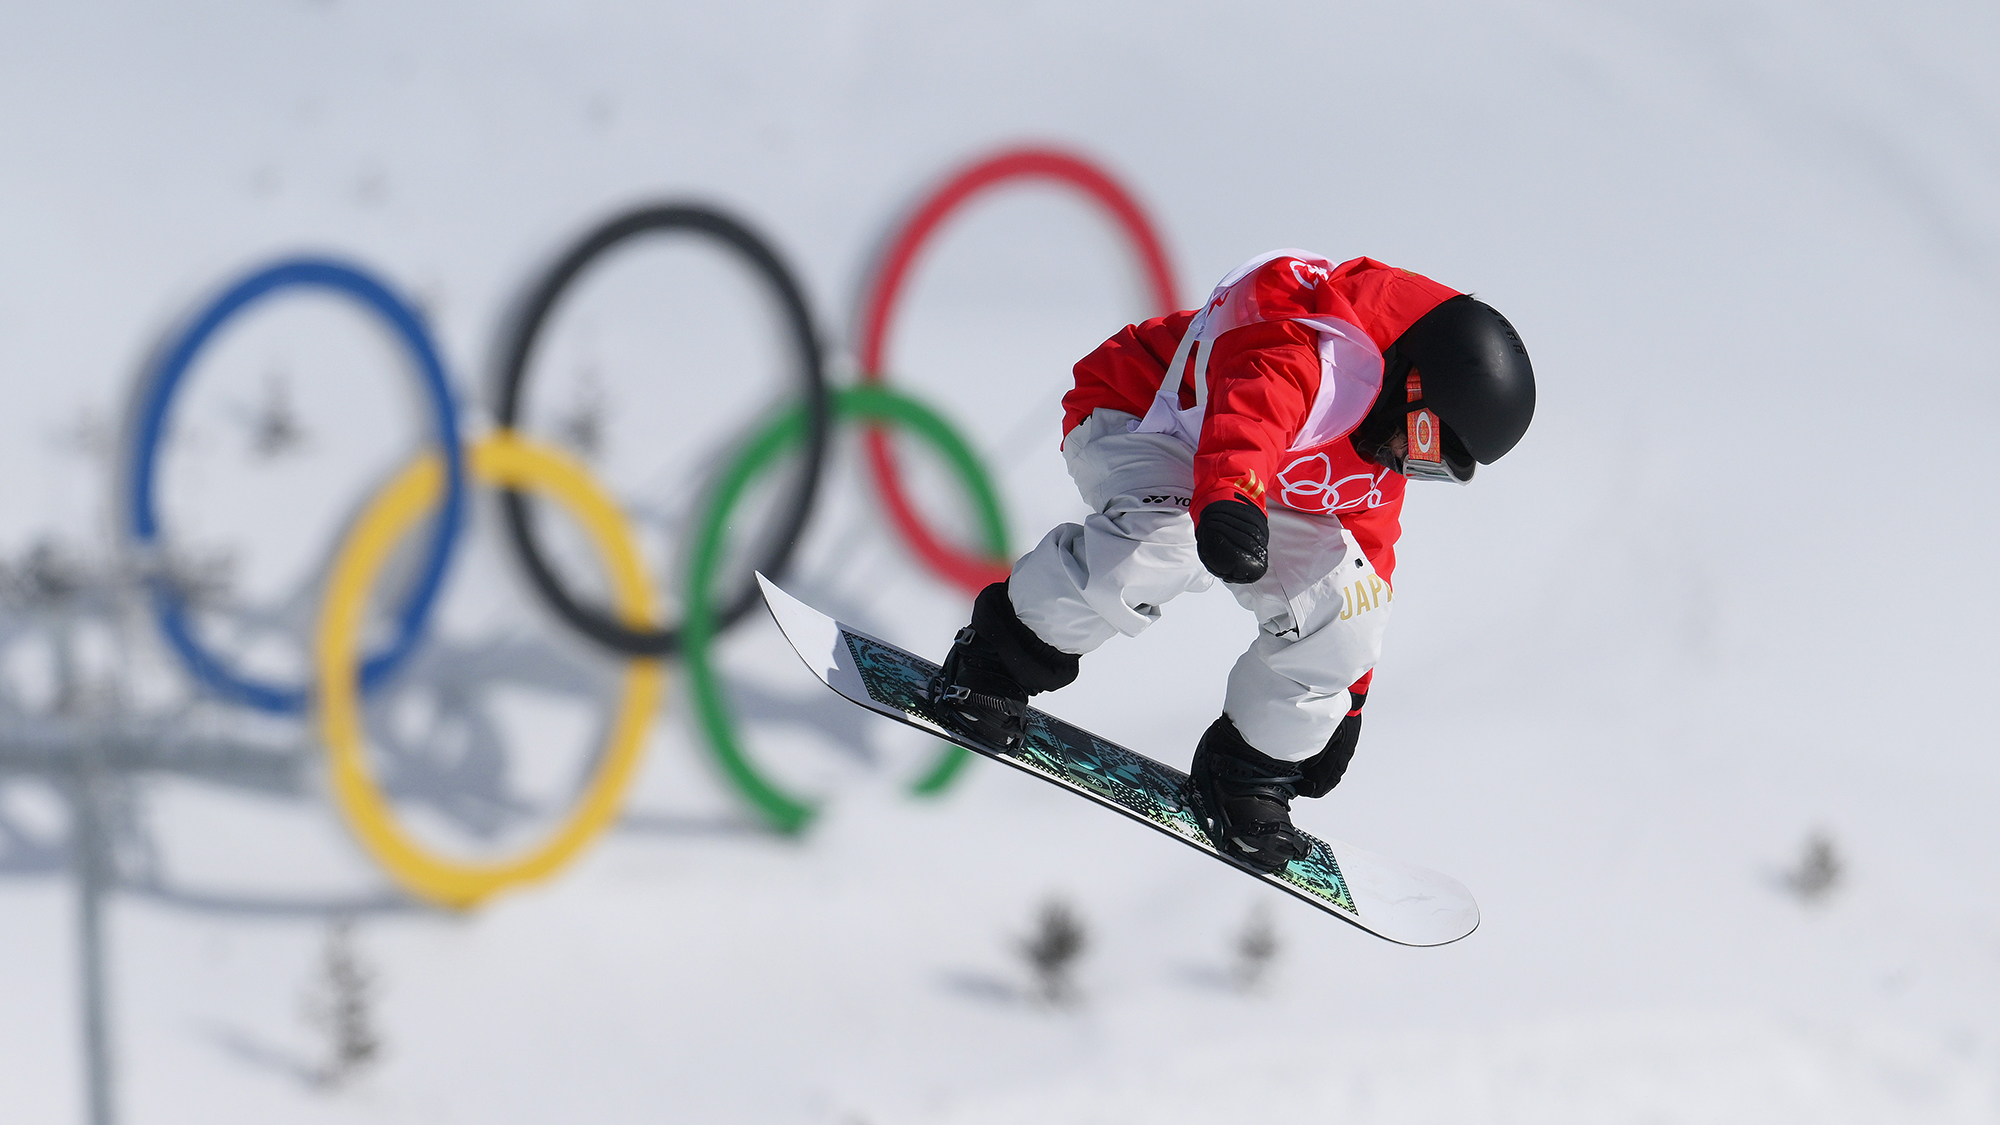 Winter Olympics 2022 snowboarding How to watch, events and TV schedule Toms Guide